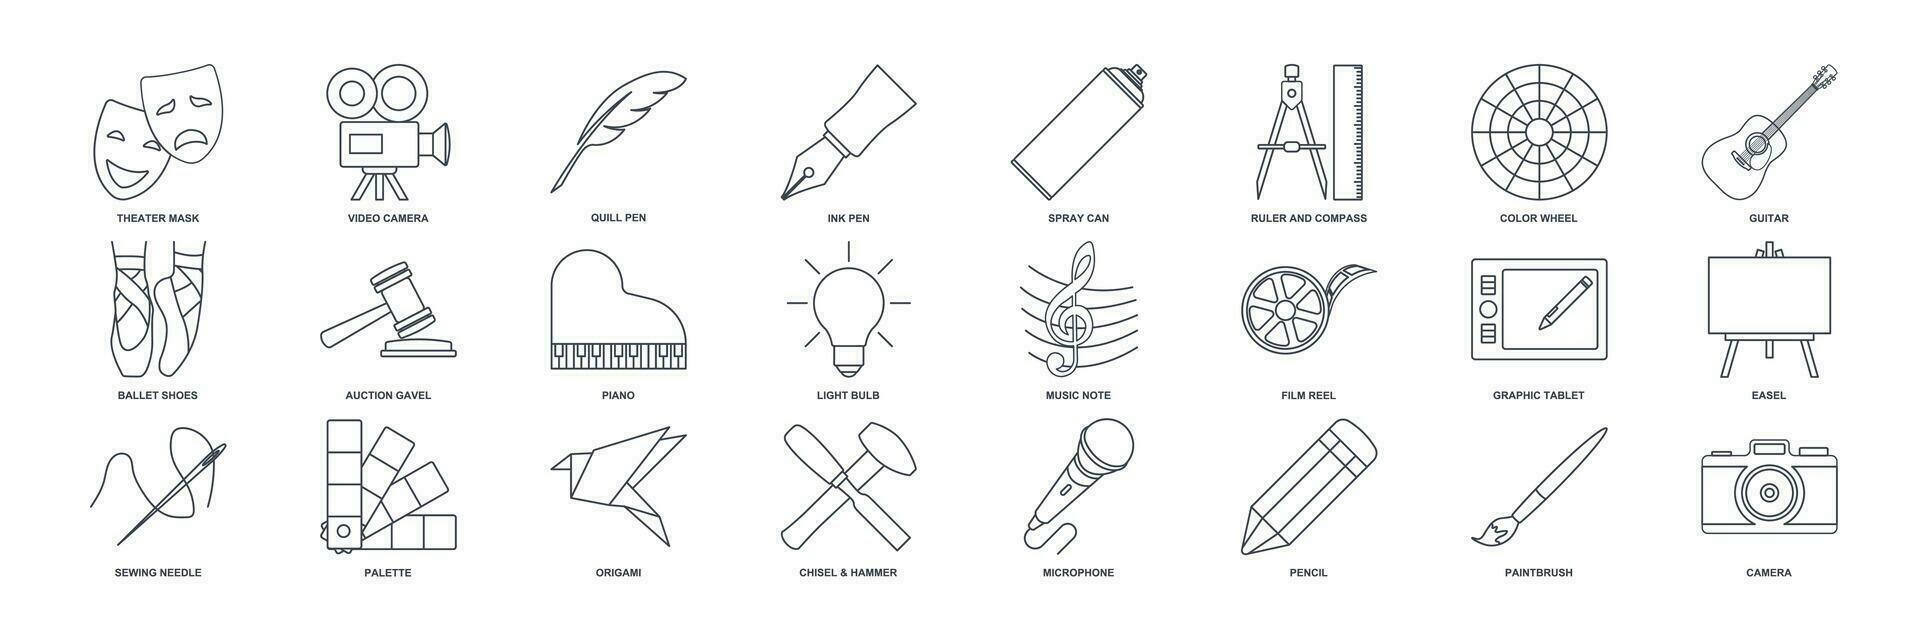 Art icon set, Design and drawing symbols collection, logo illustrations, art and entertainment signs pictograms package isolated vector illustration